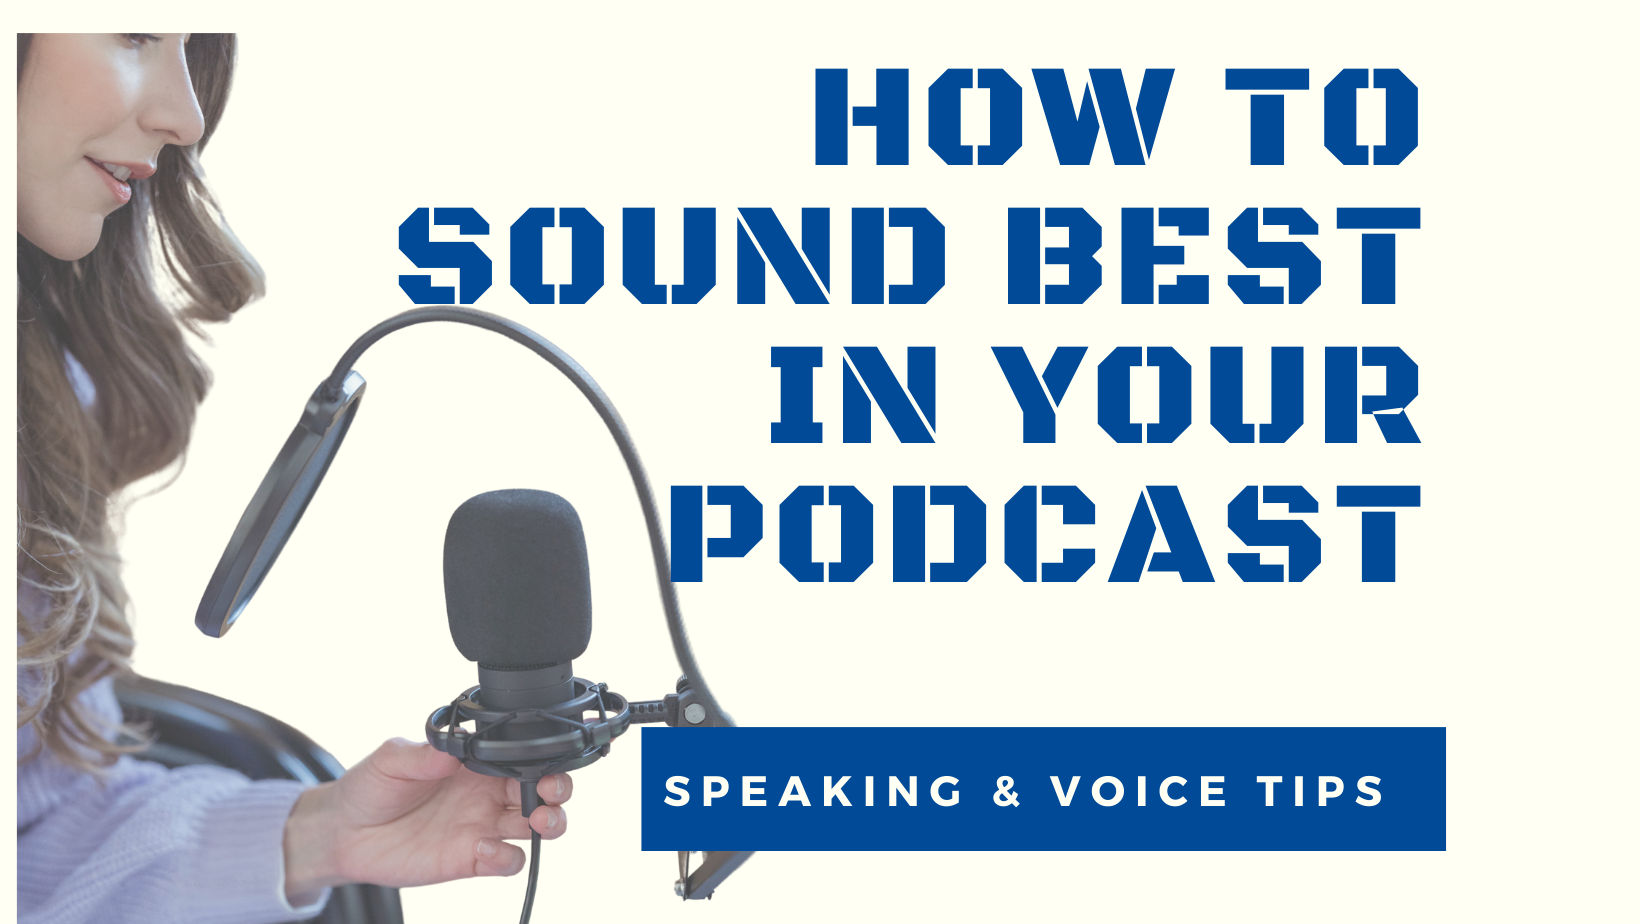 How To Sound Best In Podcast – Speaking & Voice Tips